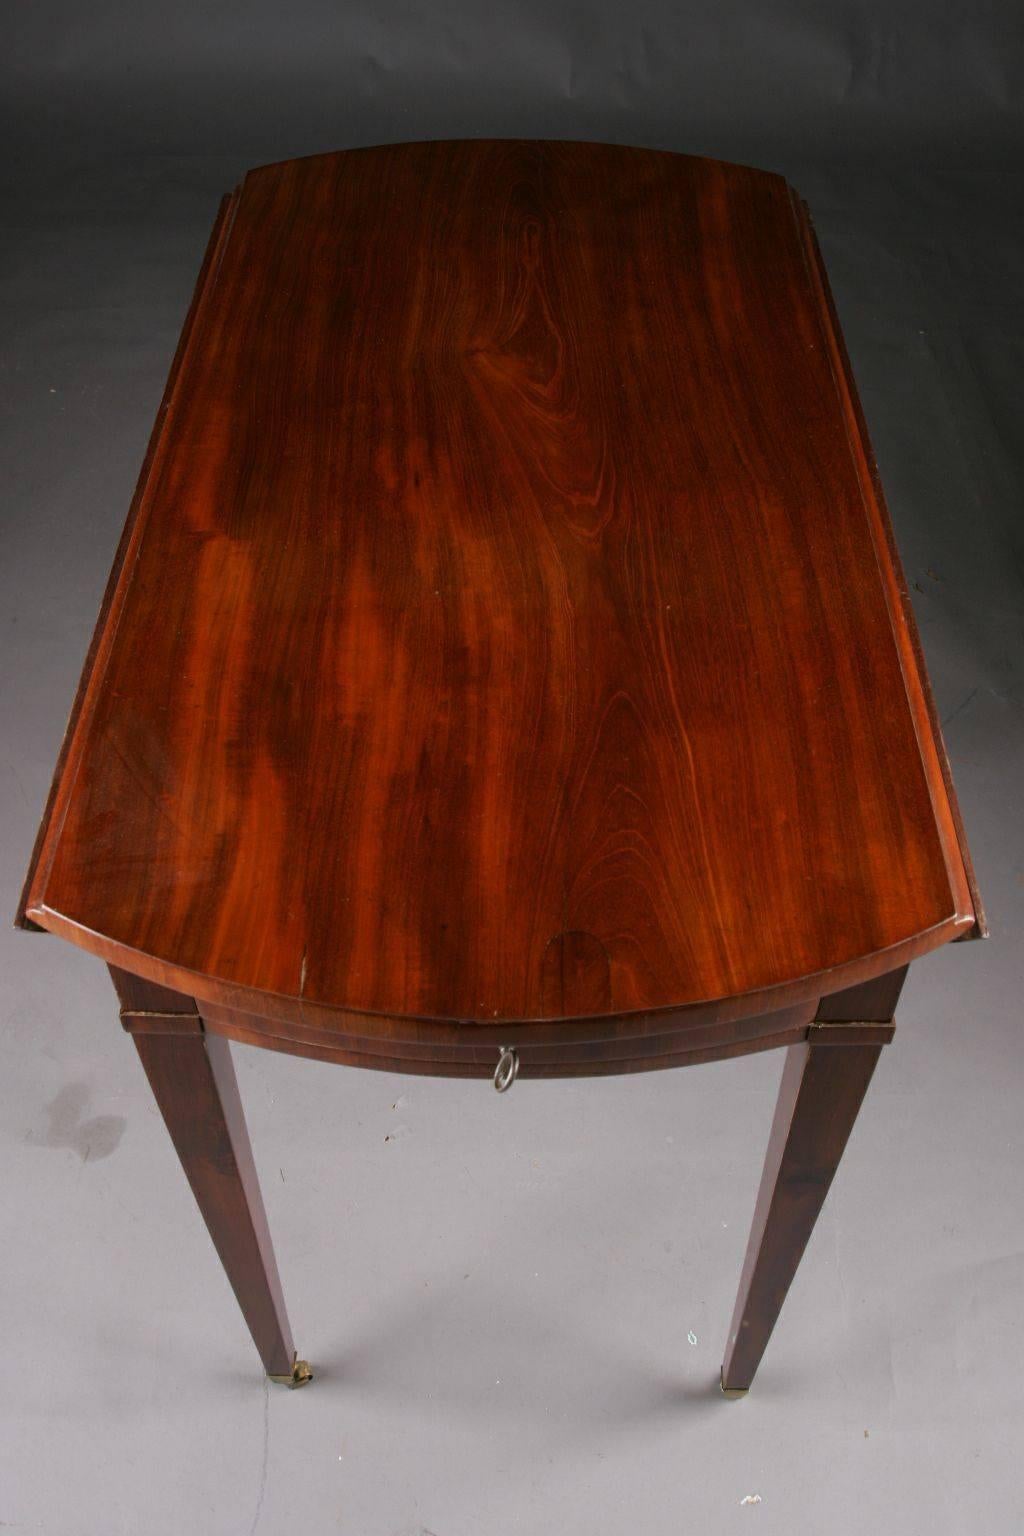 Original Biedermeier folding table or Pembroke table, circa 1825-1830.
Gorgeous mahogany on pinewood. Straight edging base on conical squares in bronze caps with wheels ending. Deep drawer on the side. Slightly protruding tabletop, foldable on both